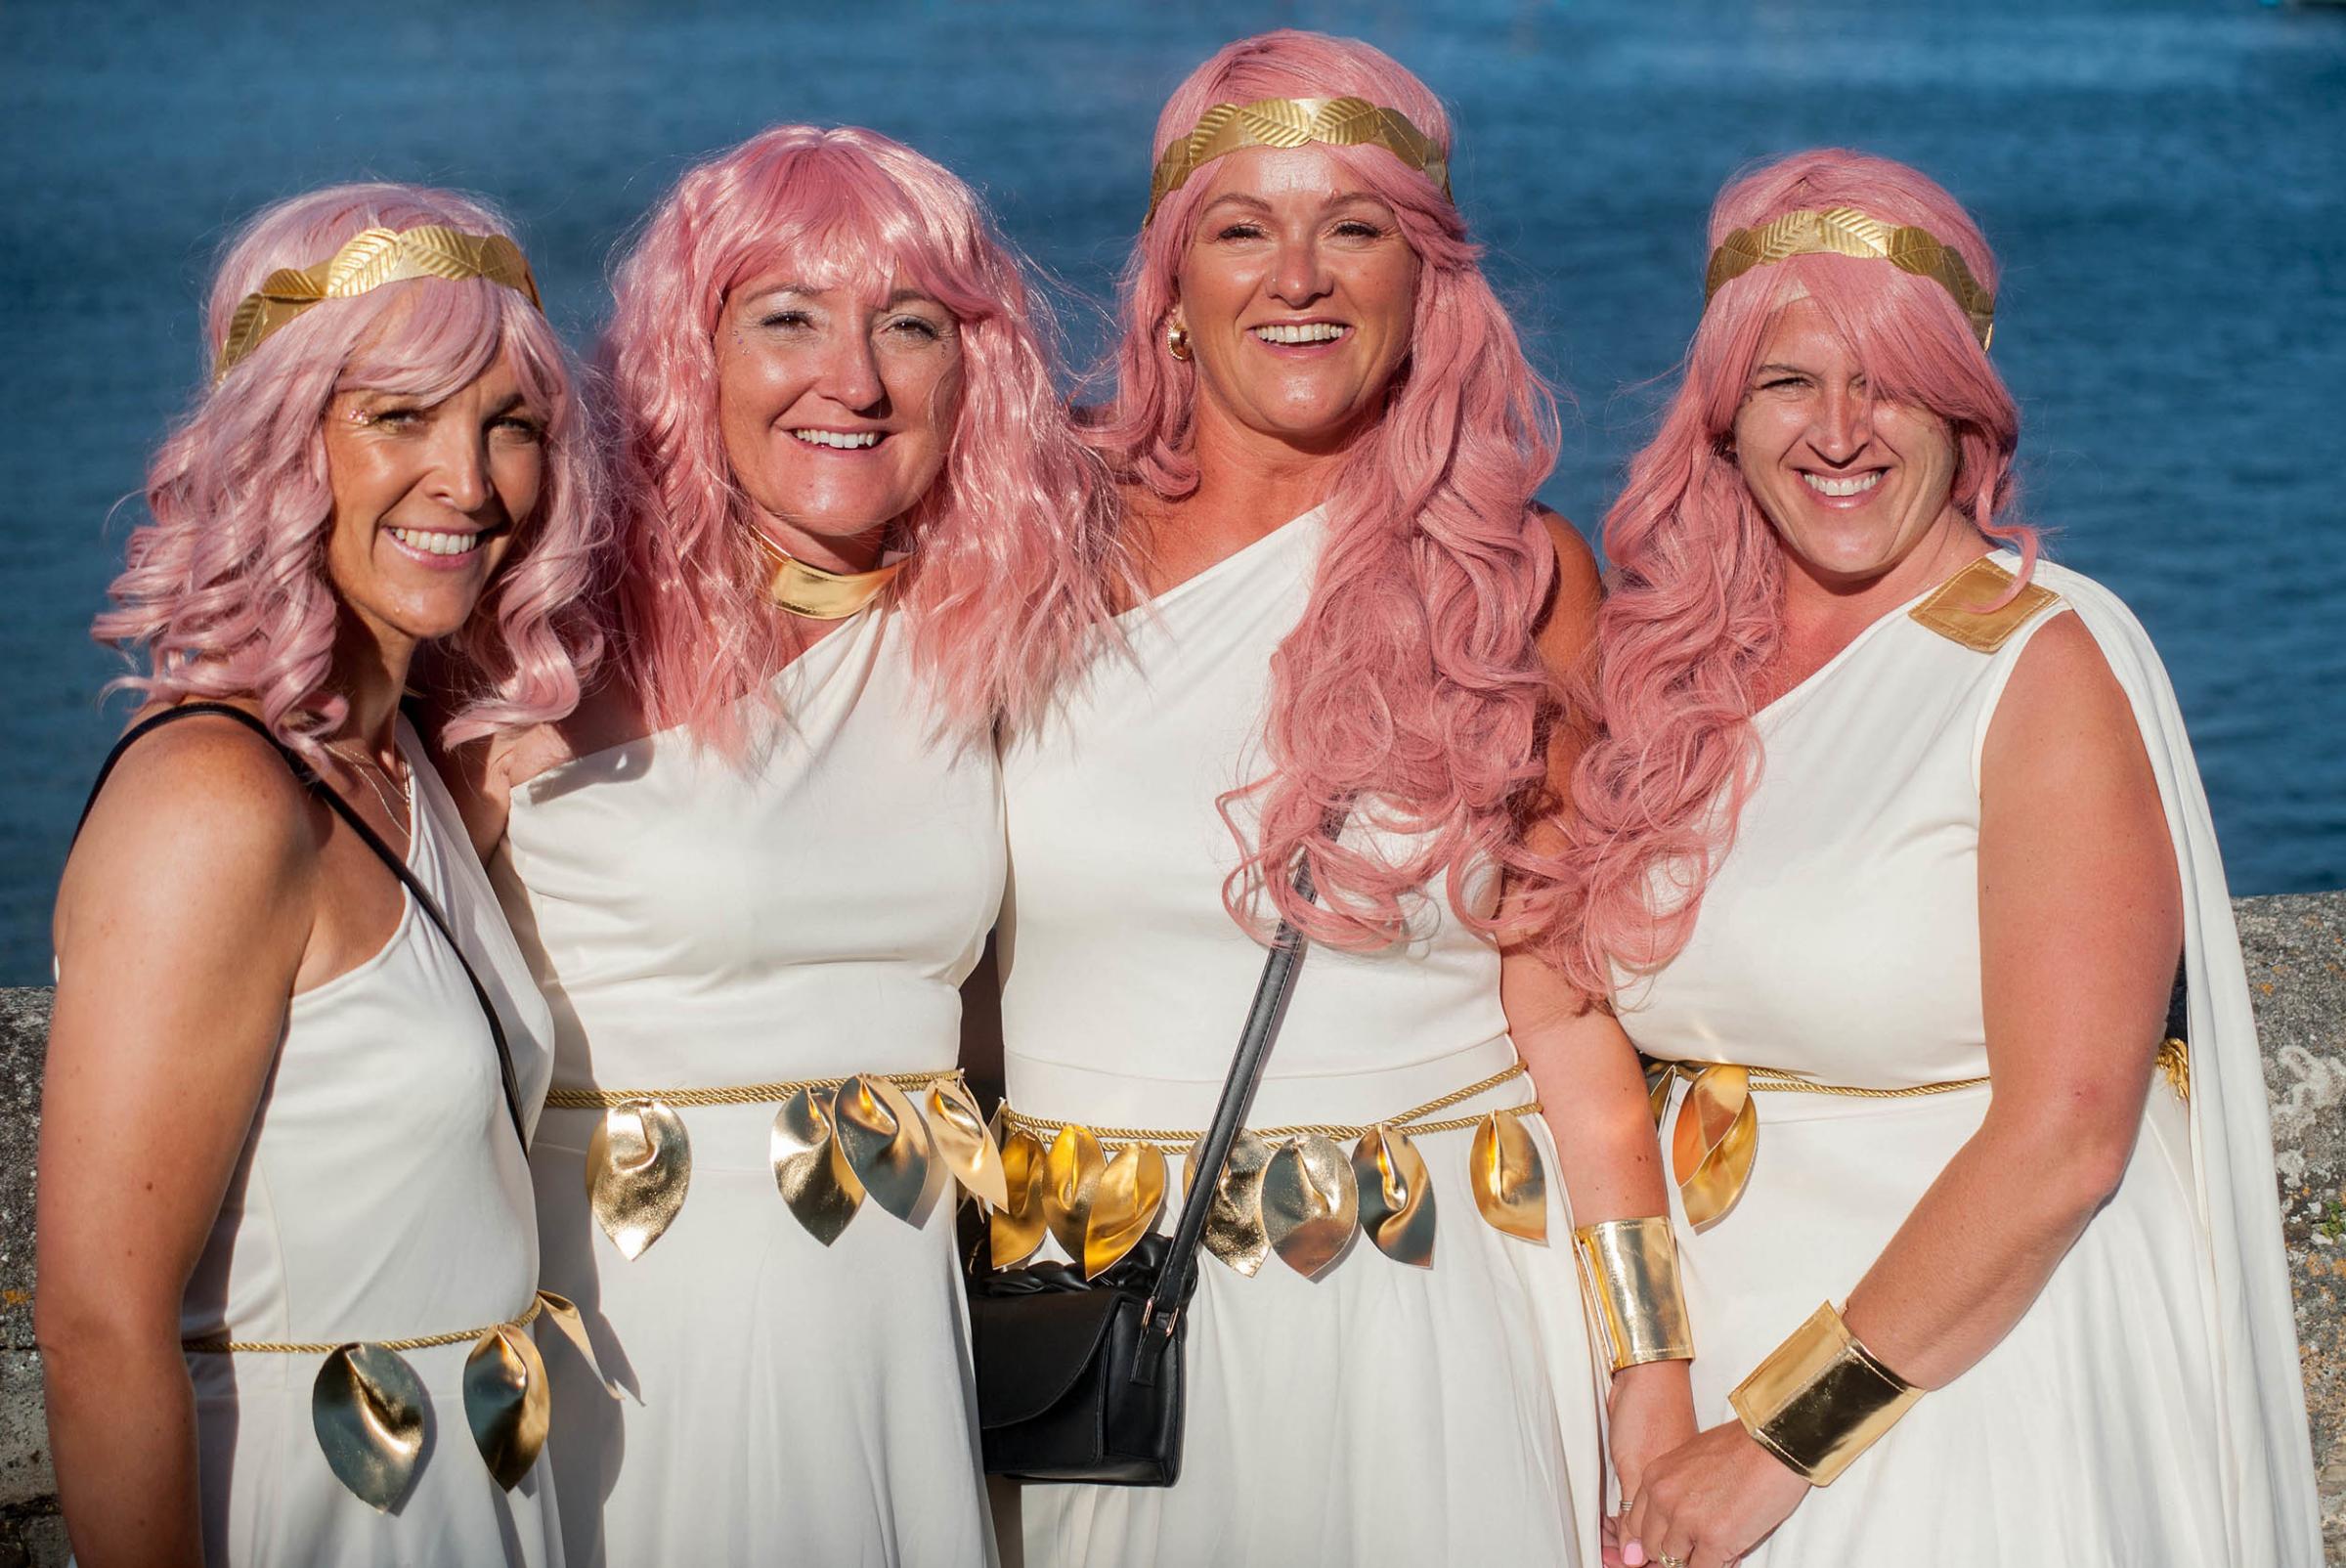 Falmouth Pink Wig Parade from the Greenbank Hotel to Church Street car park on Friday evening: L/r: Natalie, Jen, Nicky and Sarah, pictured at the Greenbank. Picture by Colin Higgs